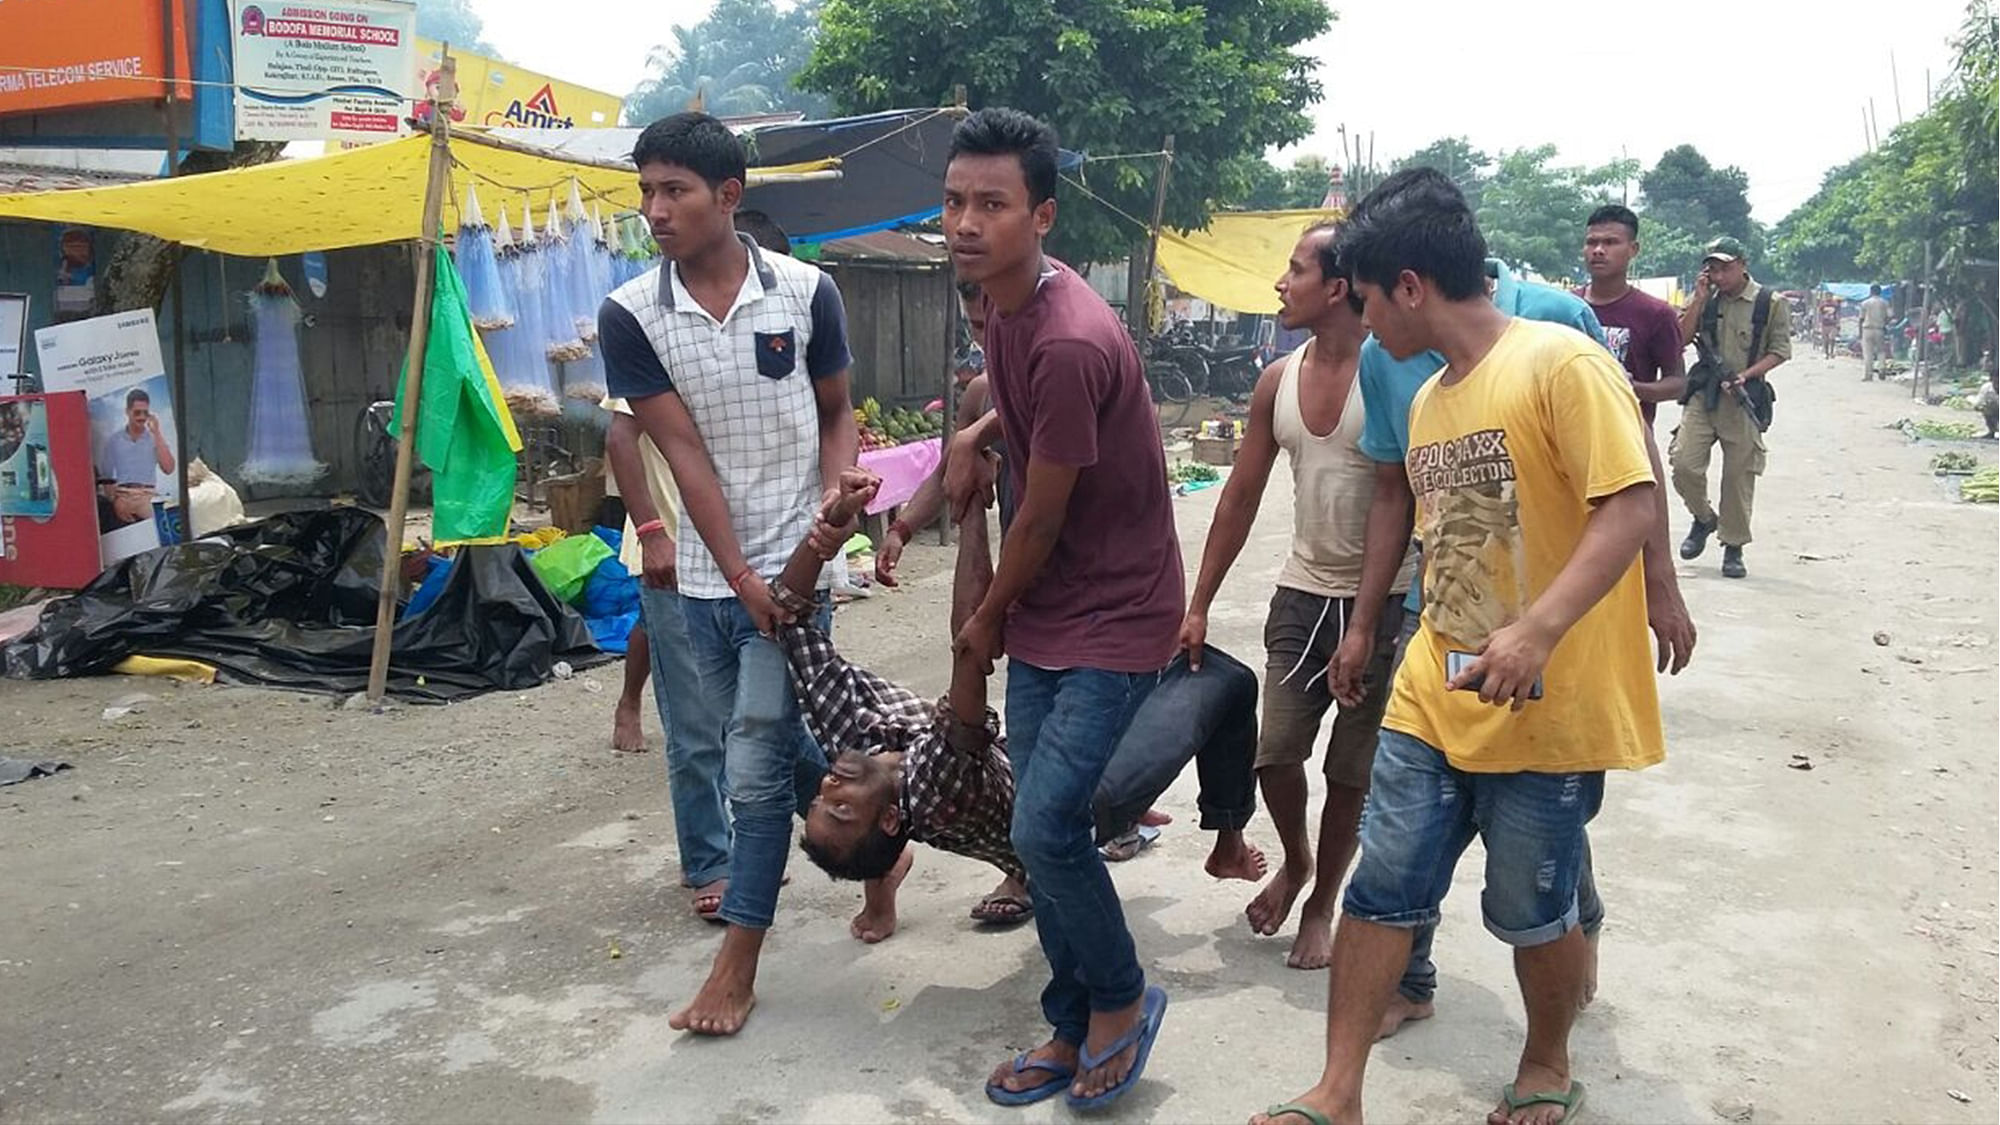 At least 12 civilians were killed on Friday when militants in military fatigues opened random fire at a busy market in Assam’s Kokrajhar town. (Photo: IANS)